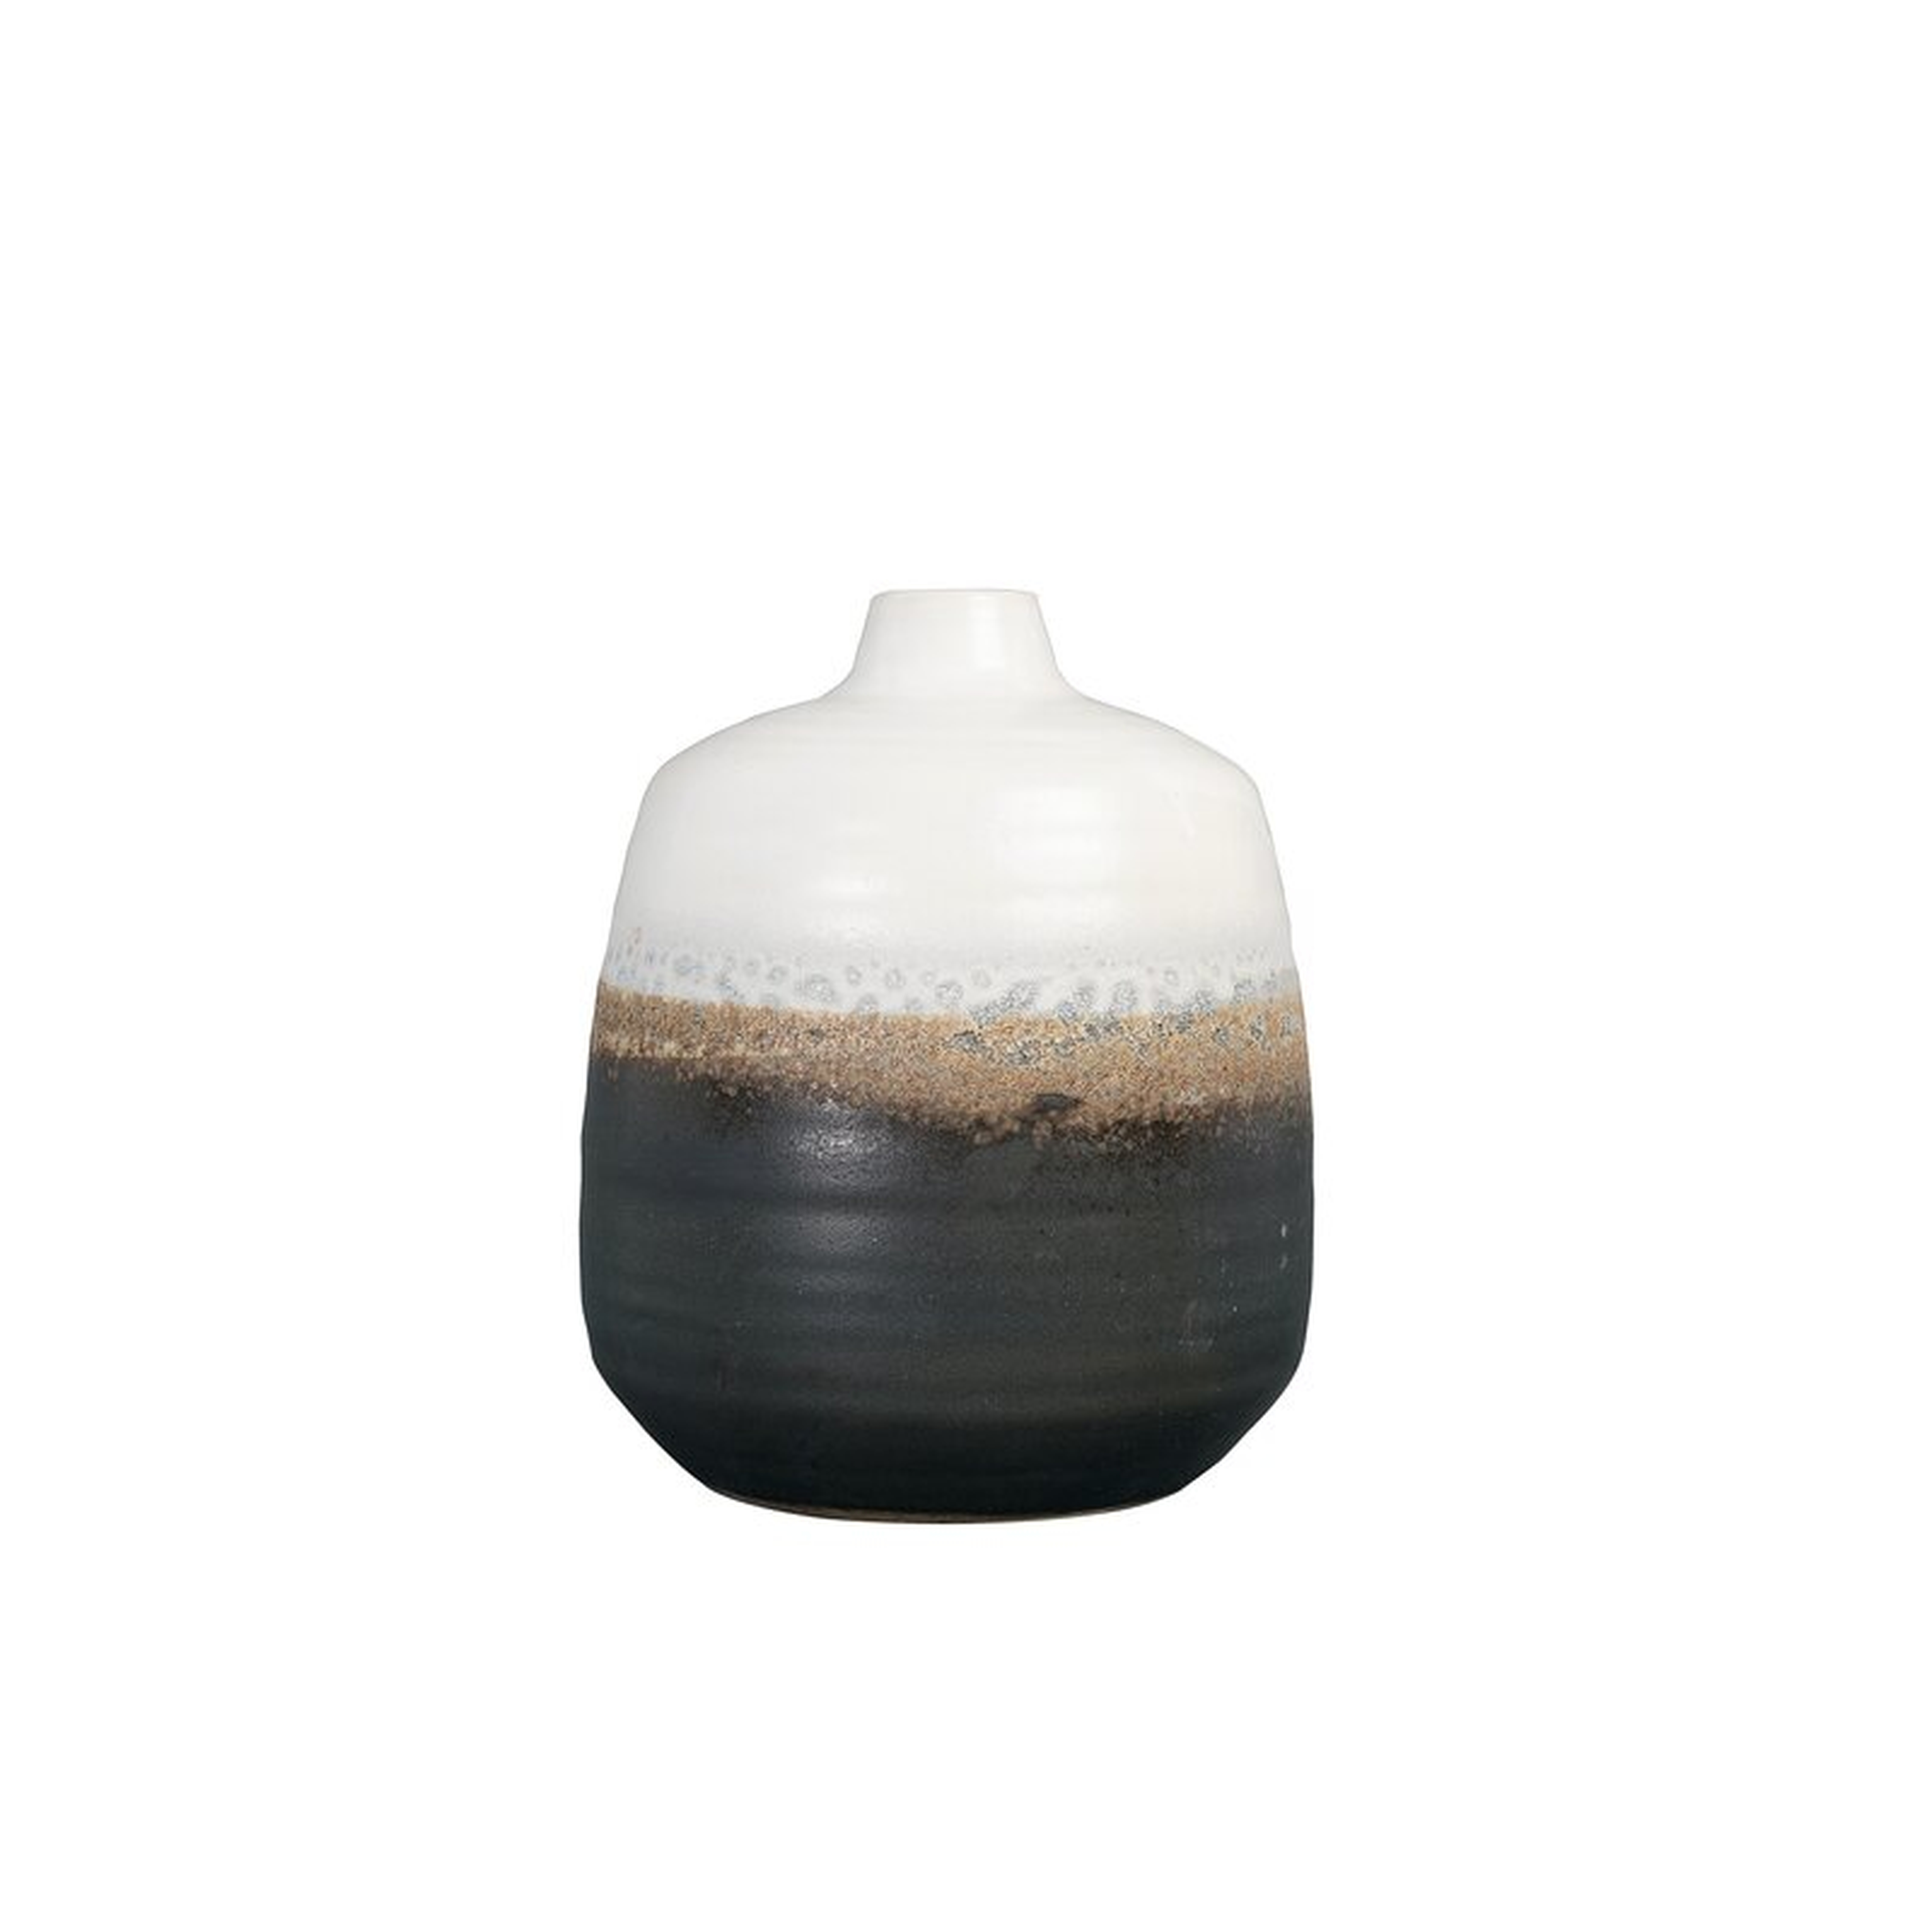 Bloomingville Small Black & White Ceramic Vase with Brown Reactive Glaze Accent Size: 7.5" H x 6.25" W x 6.25" D - Perigold